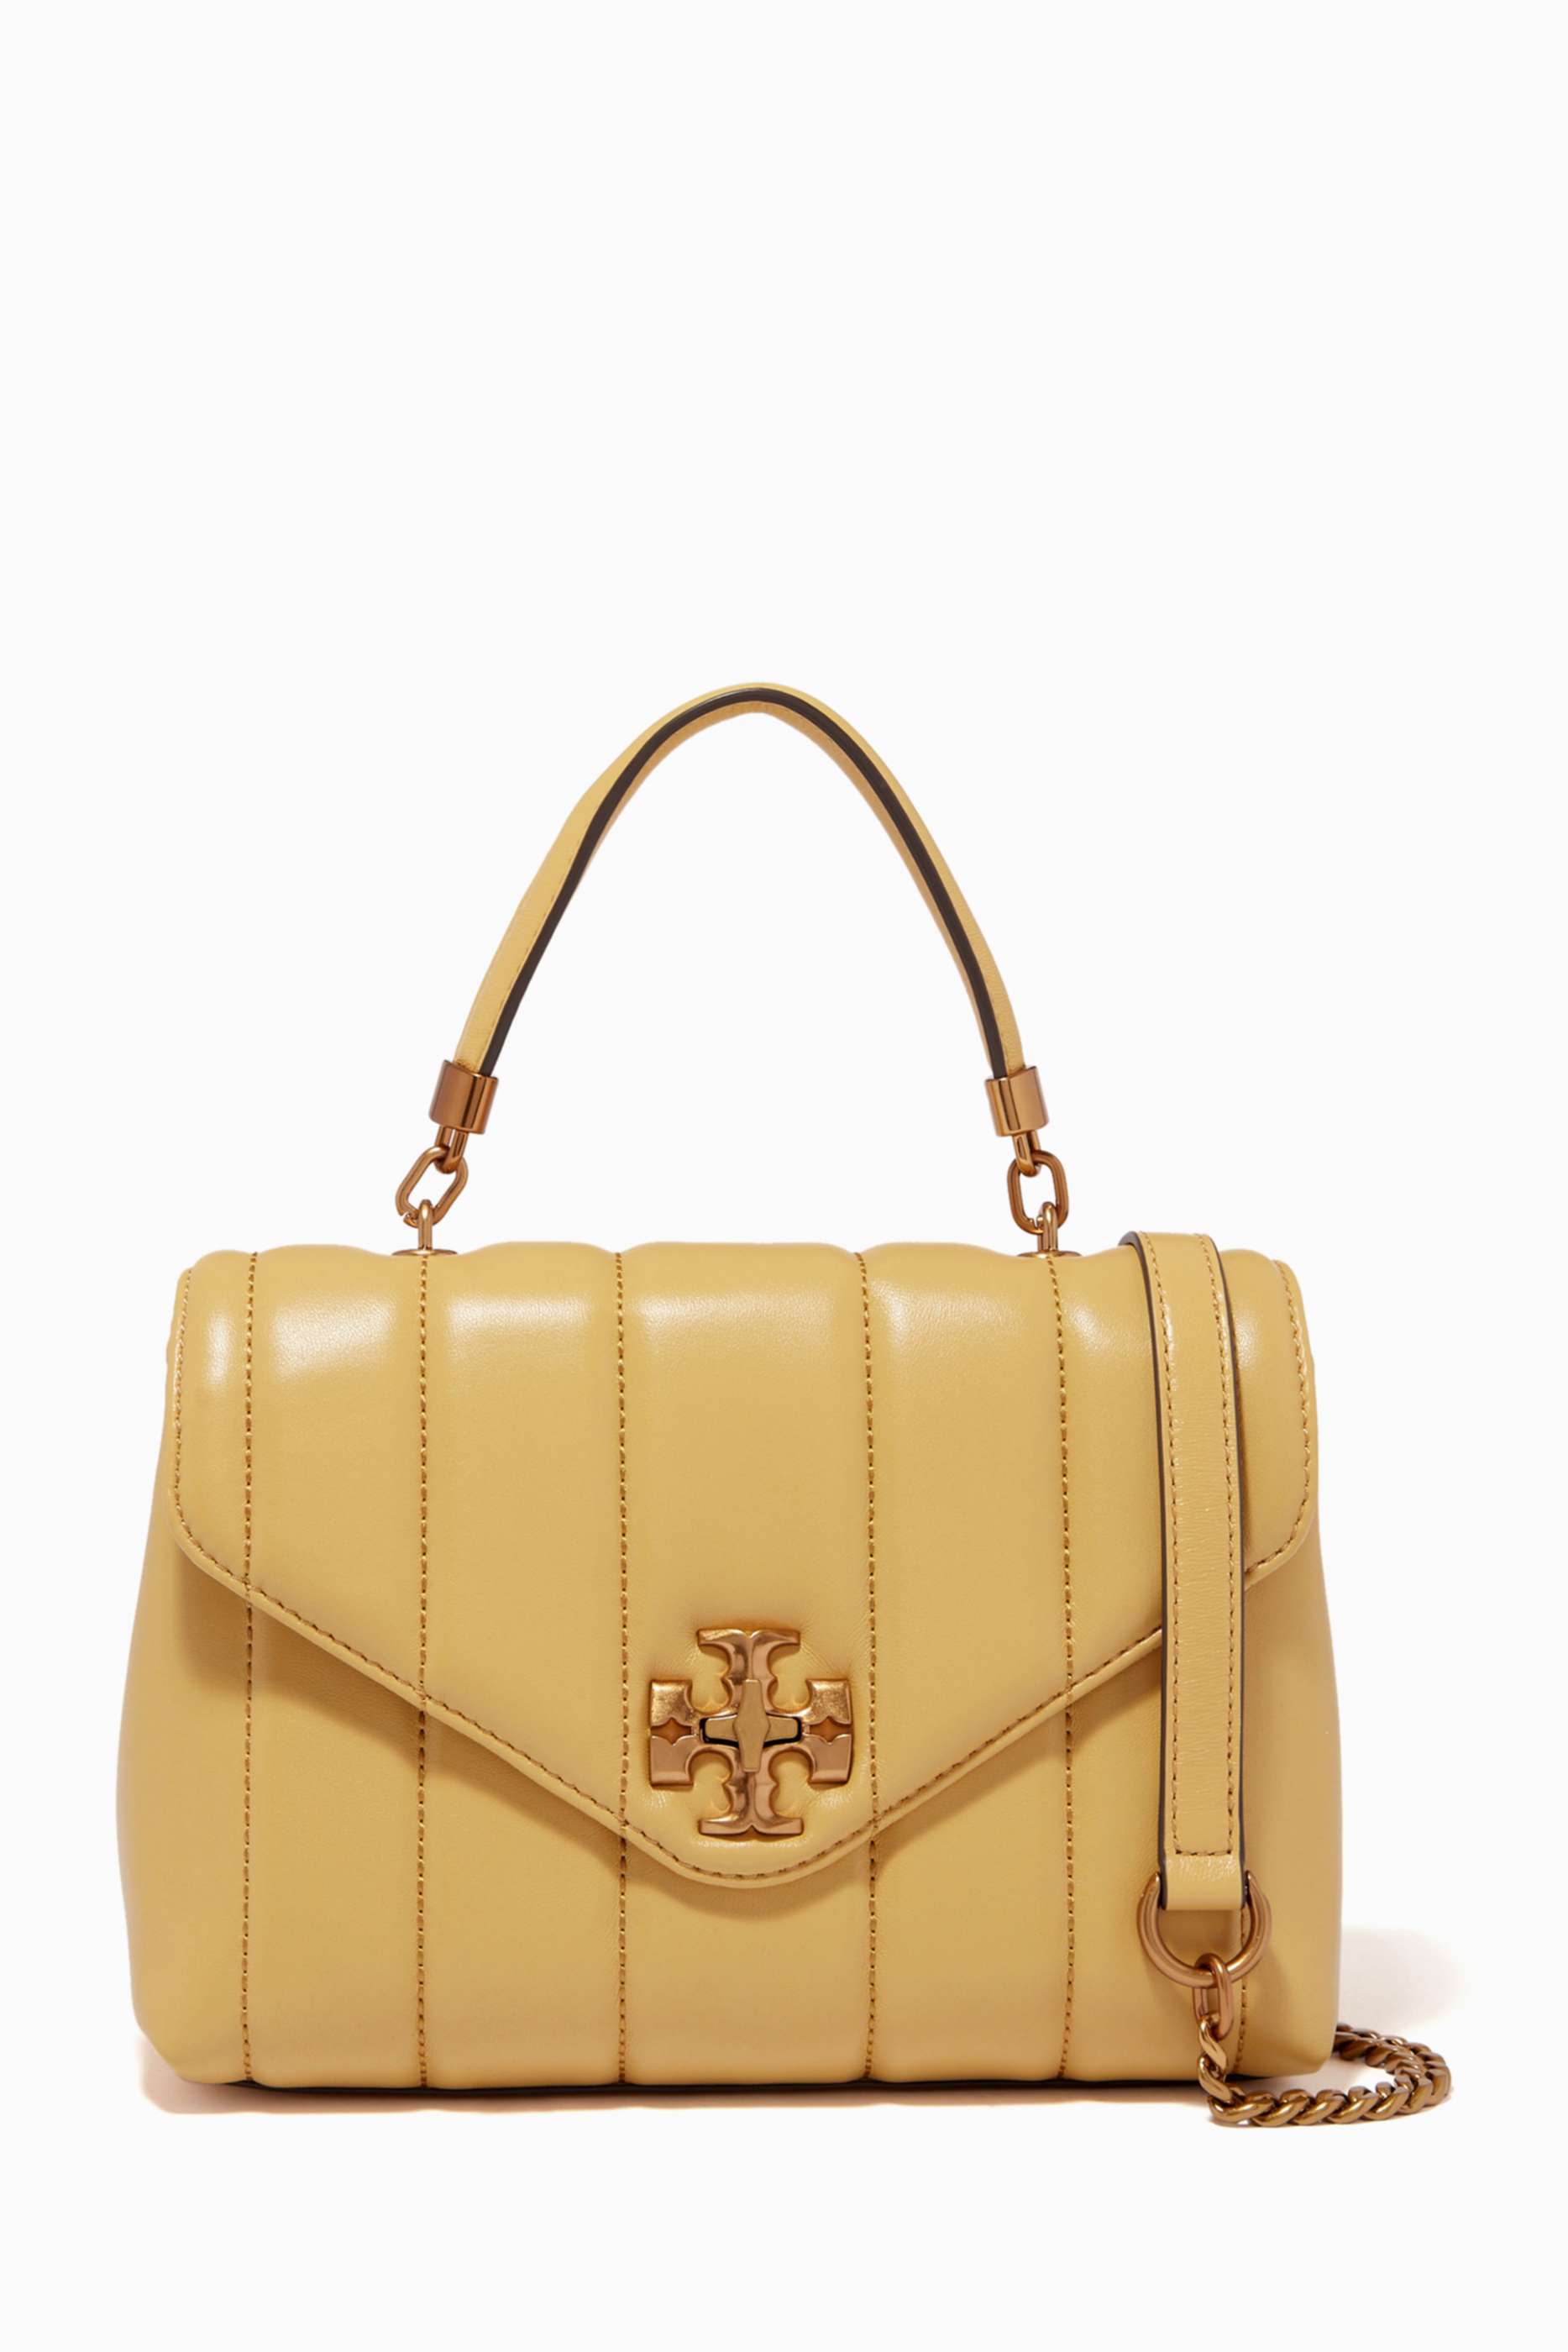 Shop Tory Burch Yellow Kira Small Satchel in Quilted Leather for 